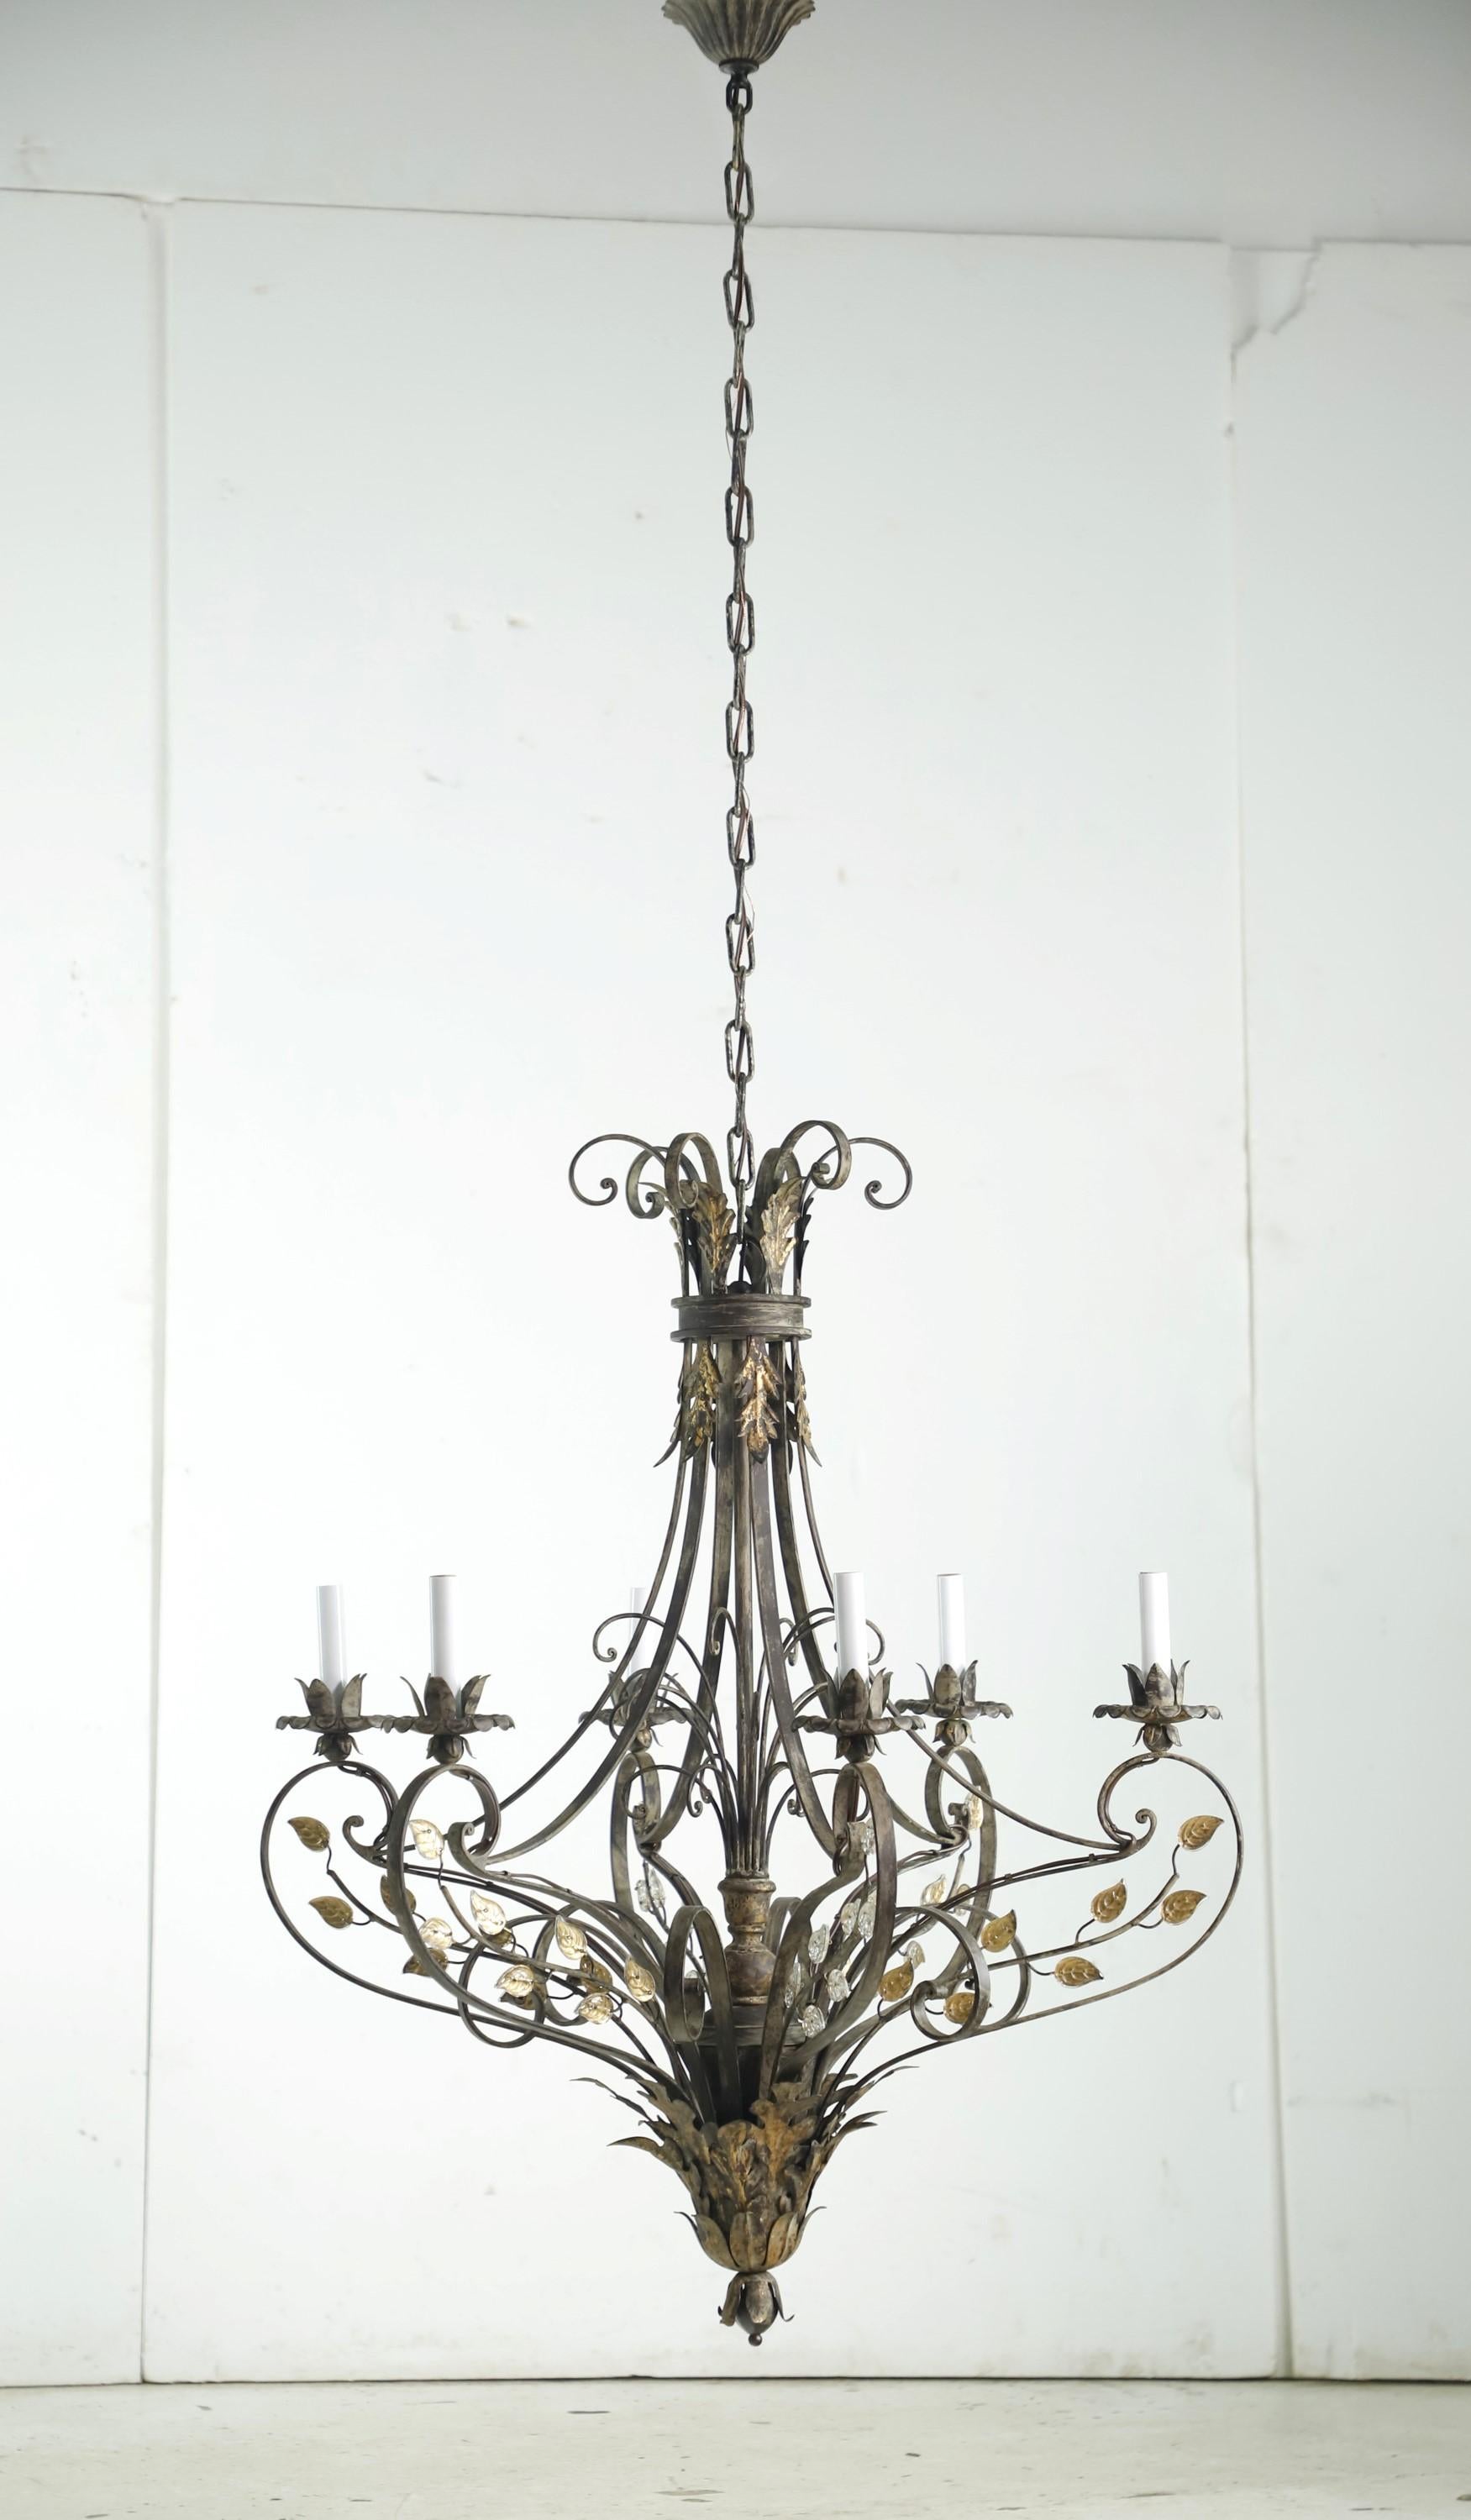 Wrought iron chandelier with crystal leaves and floral details. Black and gilt finish. Takes six standard candelabra light bulbs. Cleaned and restored. Please note, this item is located in our Los Angeles location.